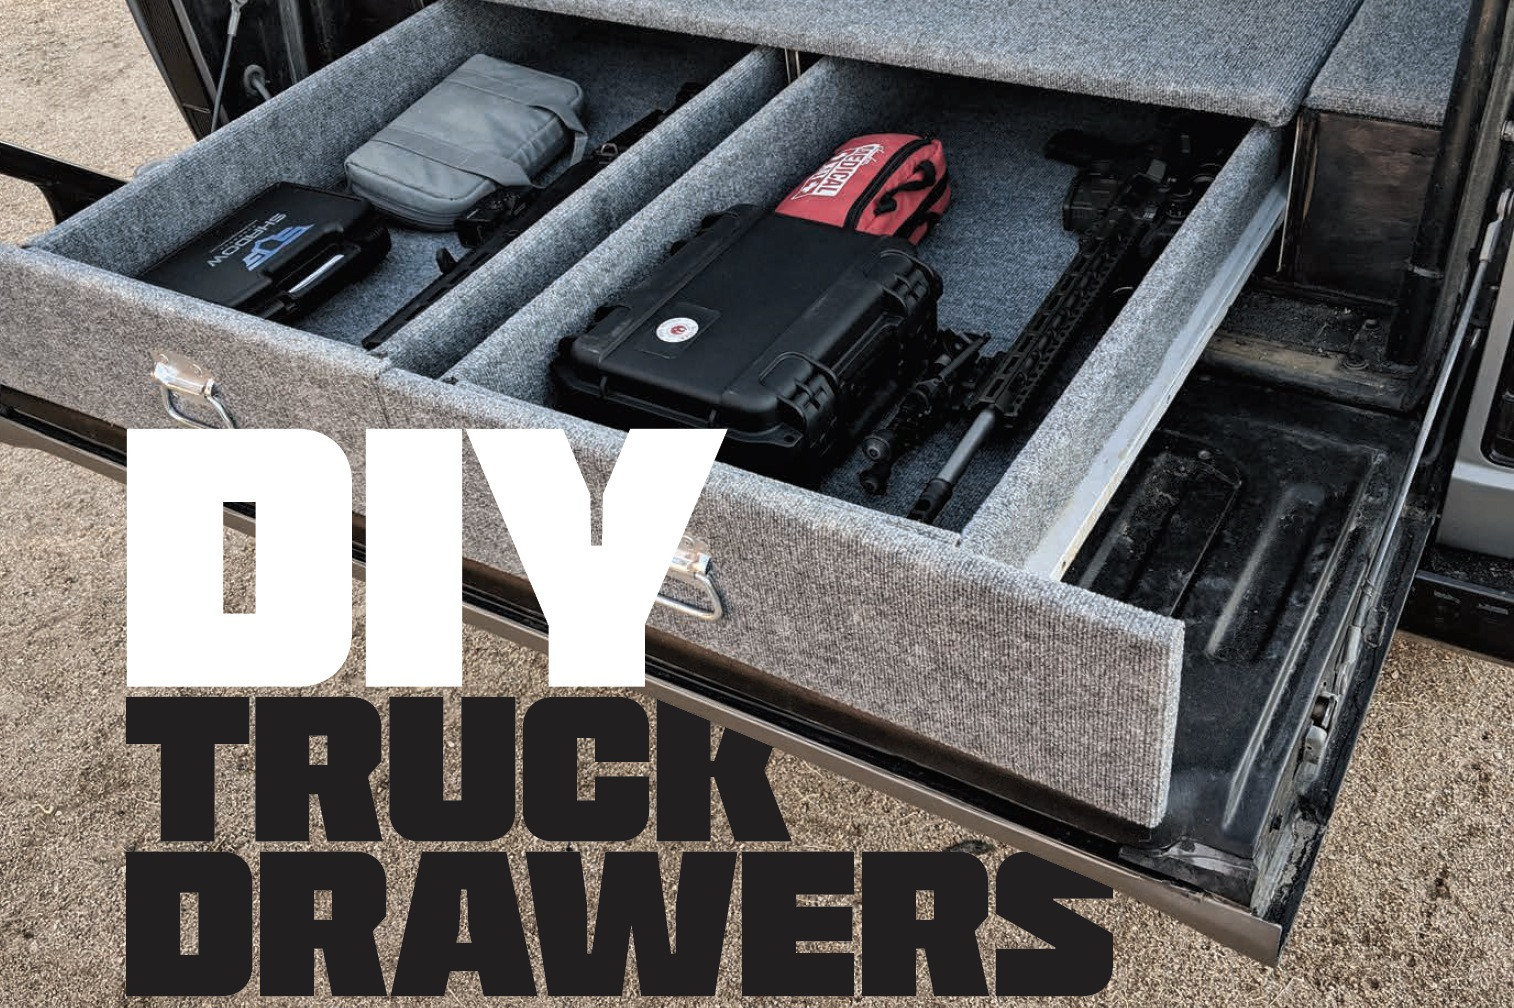 Truck Bed Organizer DIY
 DIY Truck Drawers for Guns and Gear